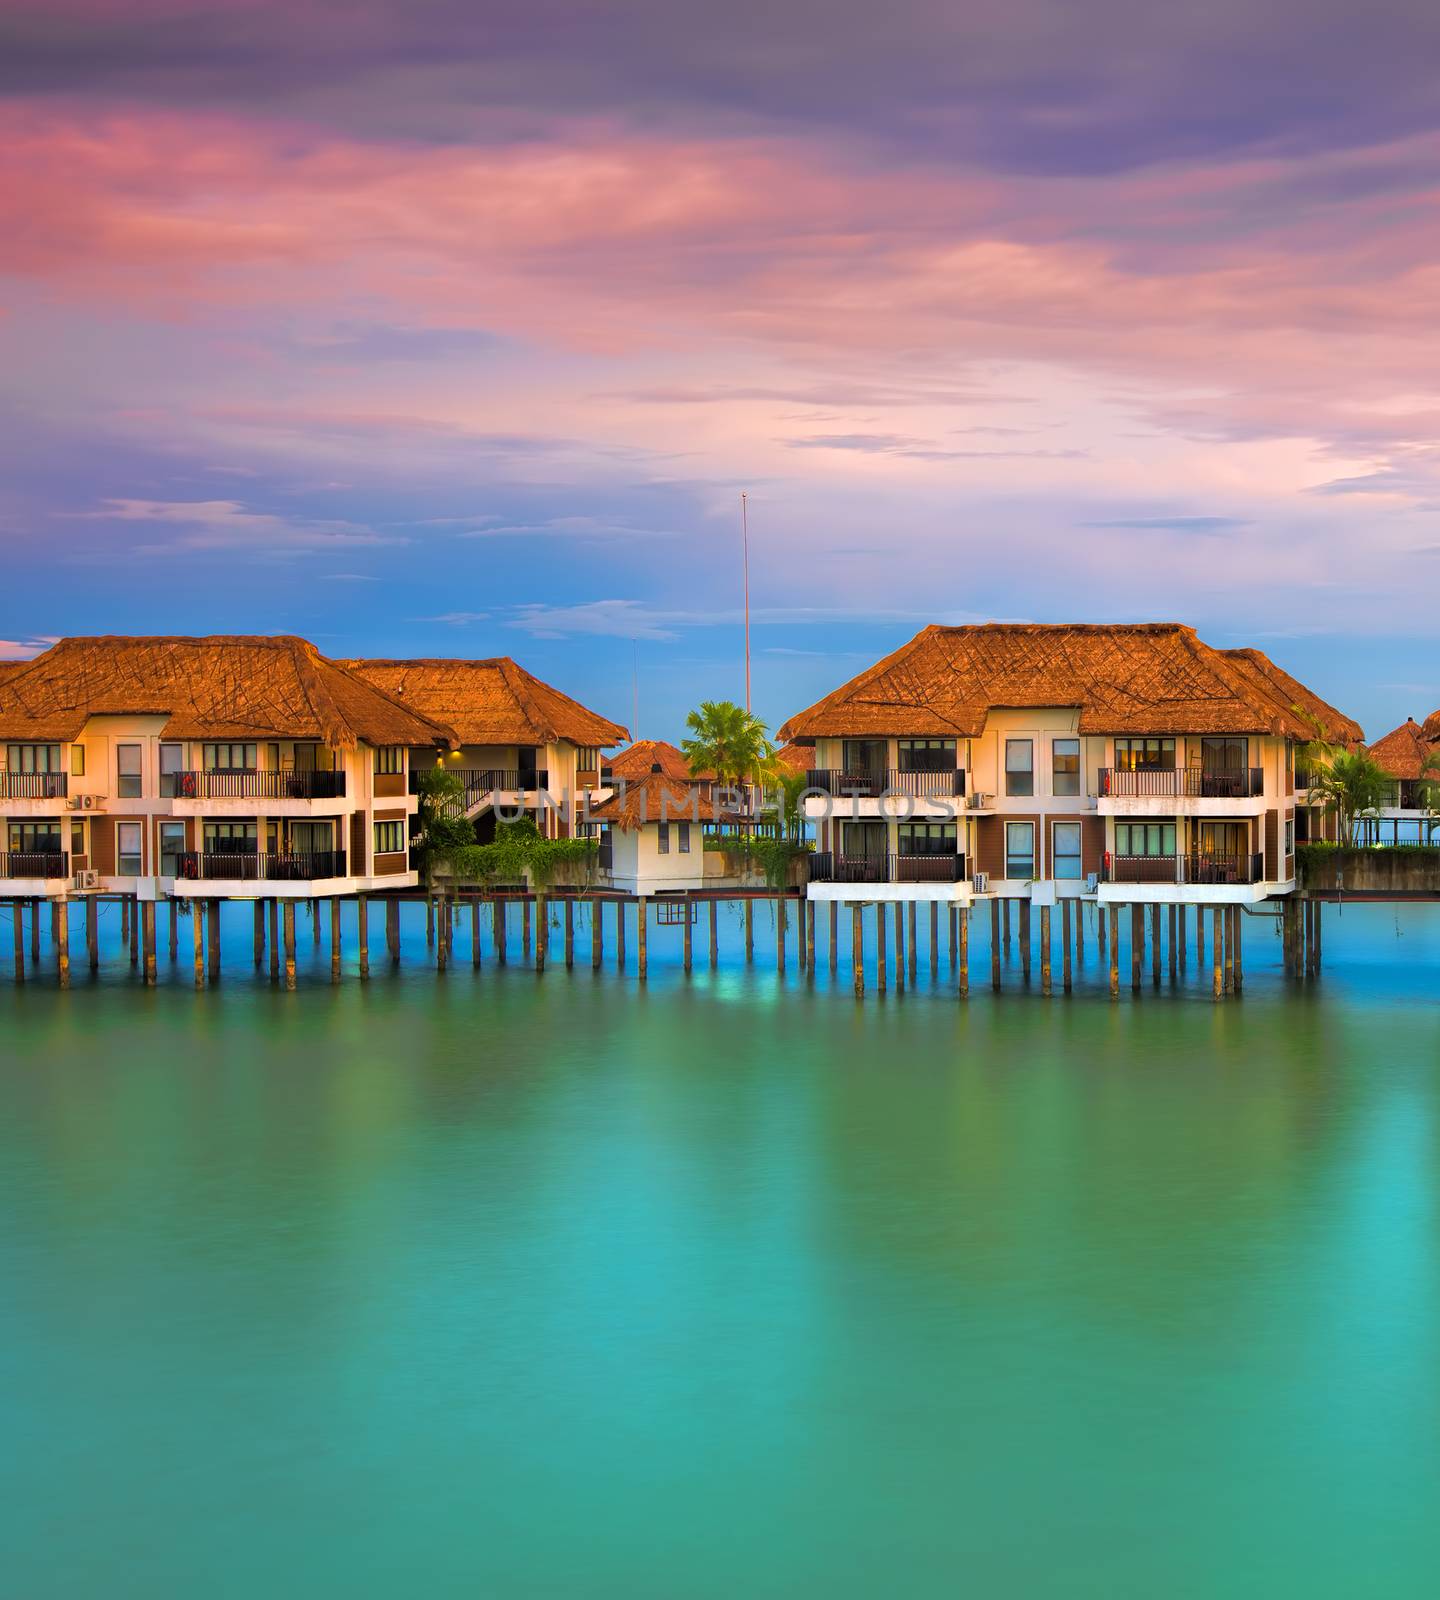 Water villas making reflections in the ocean at sunset